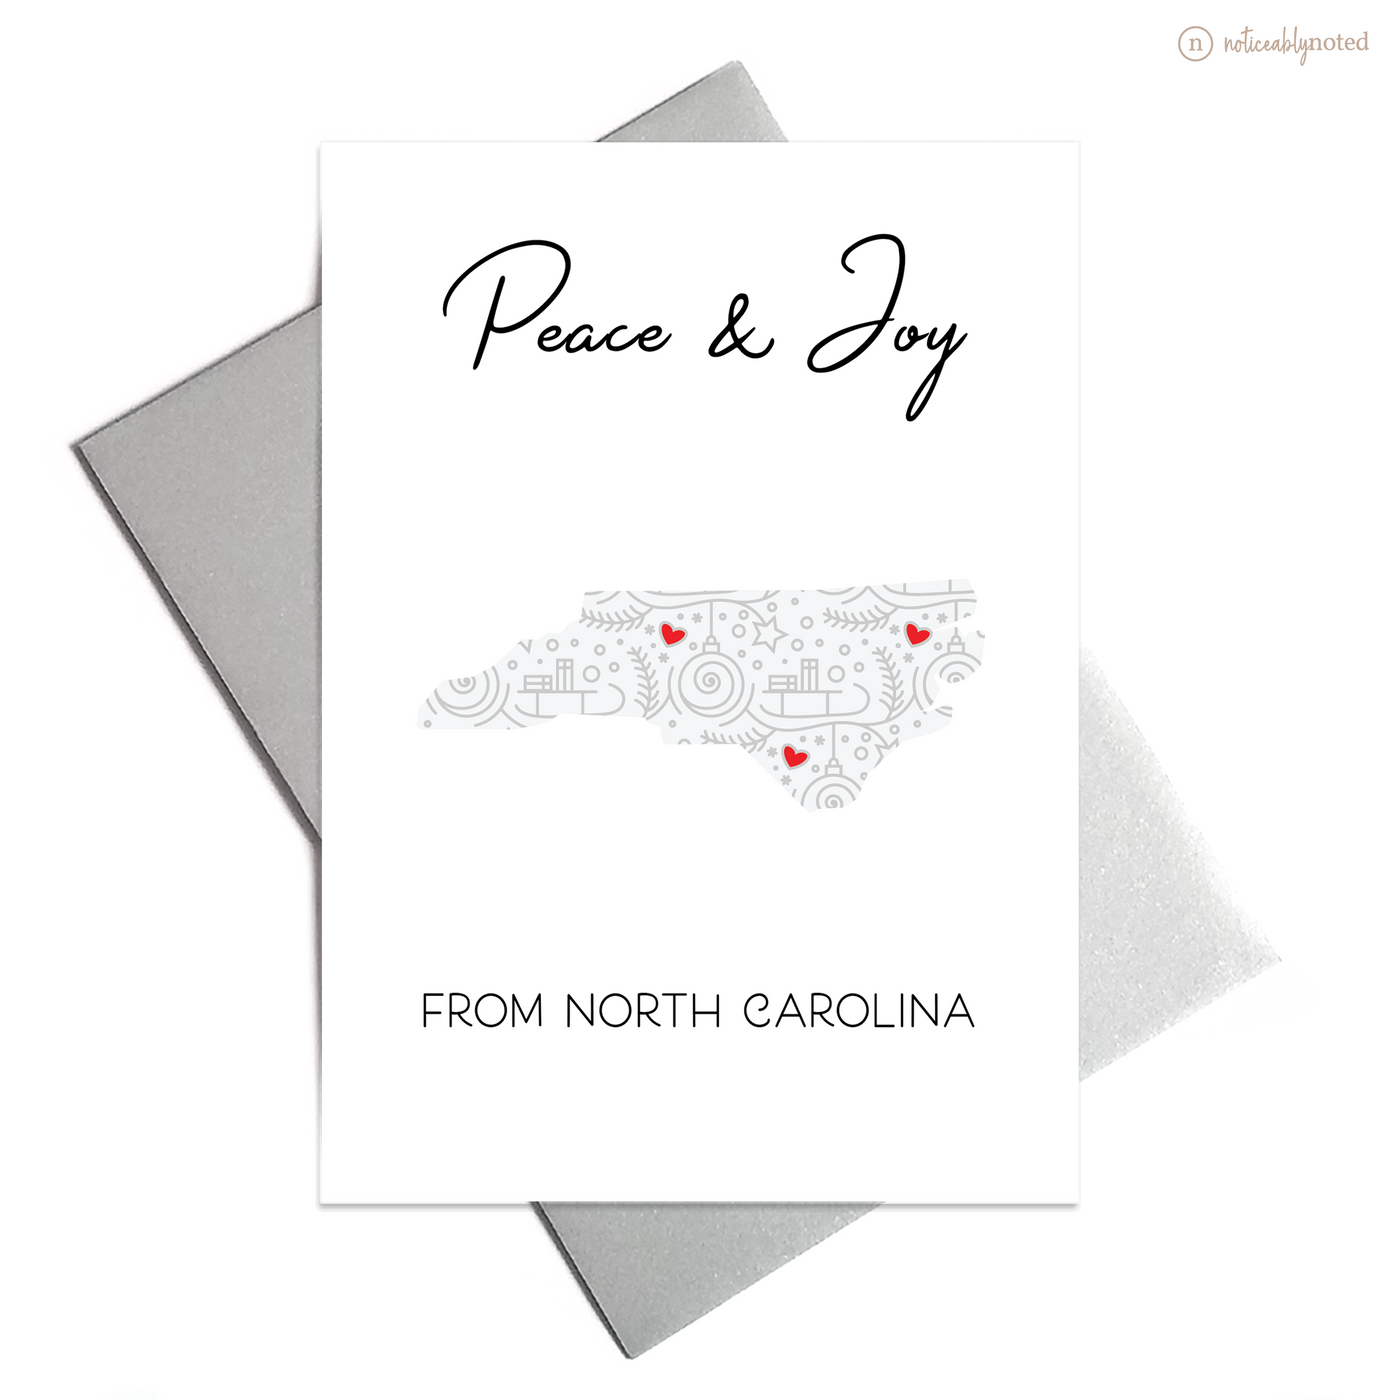 NC Christmas Card | Noticeably Noted